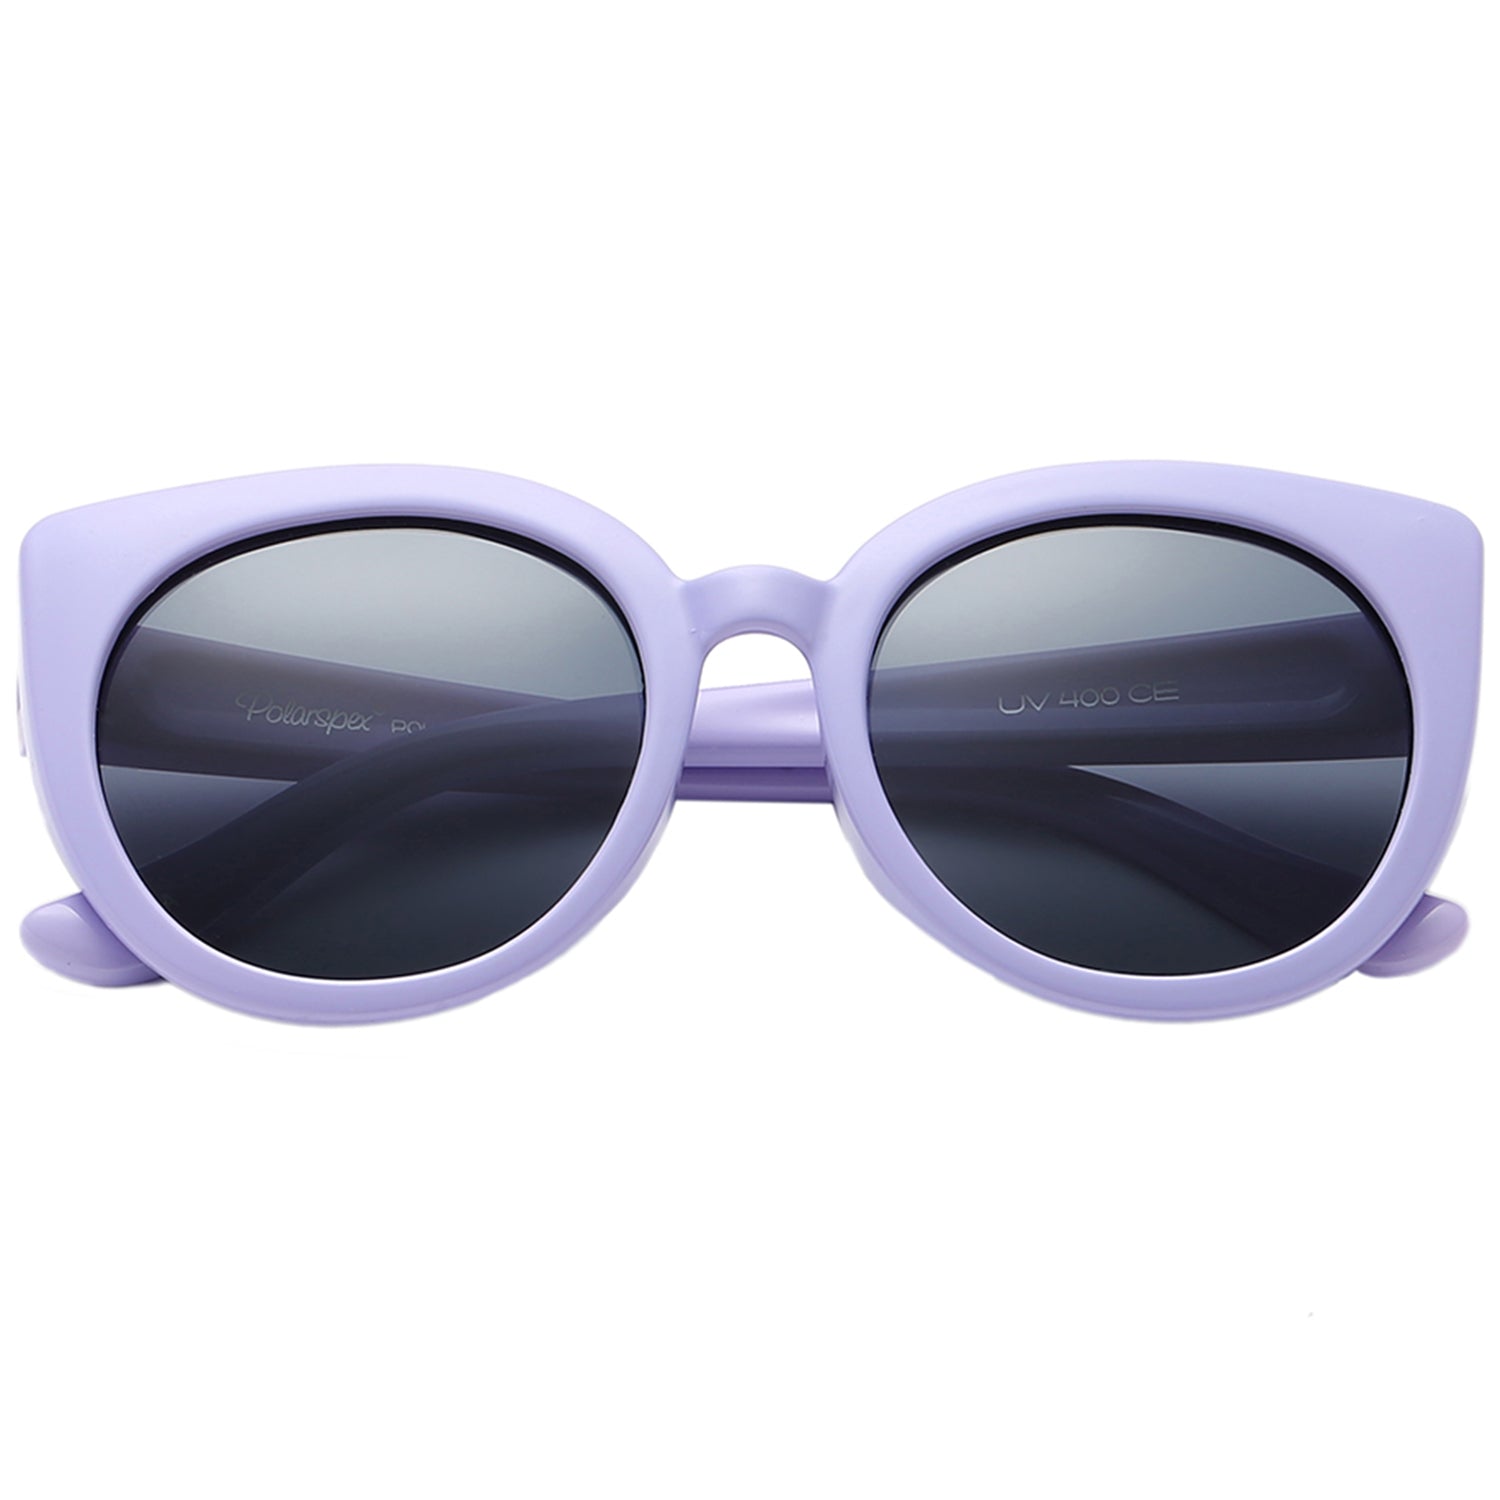 Polarspex Polarized Elastic Cateyes Style (BPA Free) Kids Sunglasses with Purple Lavender Frames and Polarized Smoke Lenses for Girls (Ages 2 - 8)